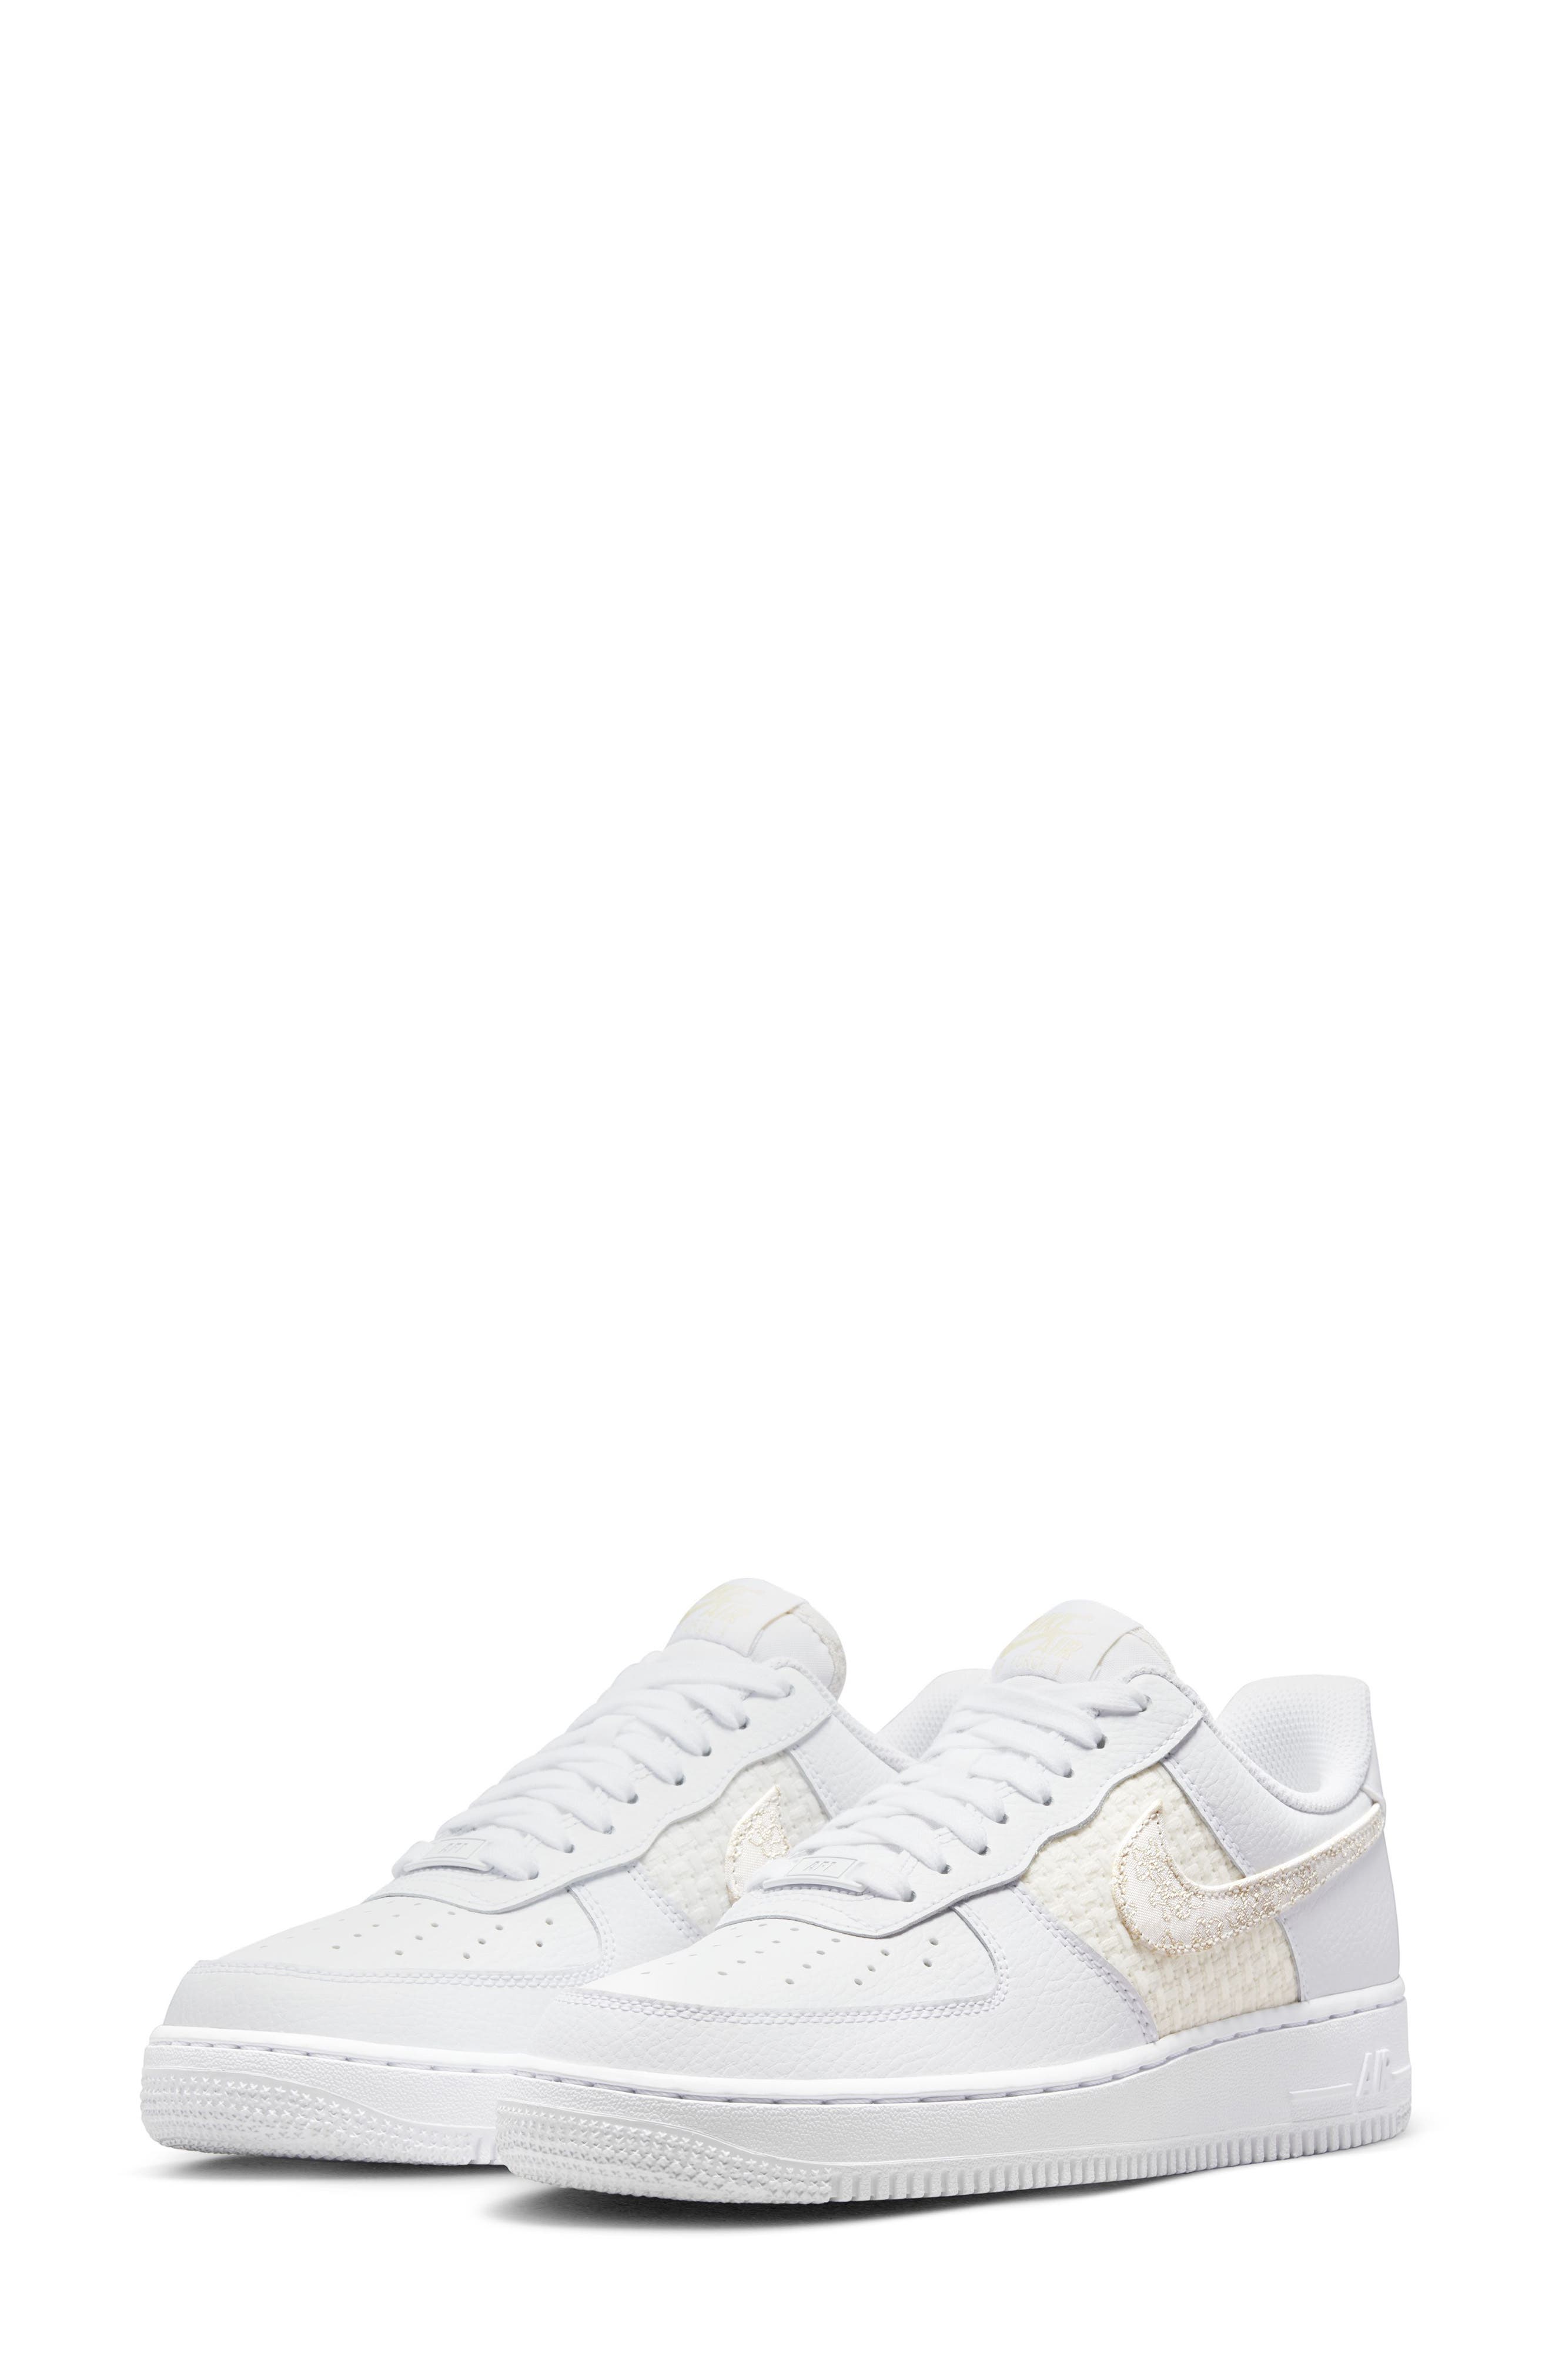 nordstrom nike air force 1 womens